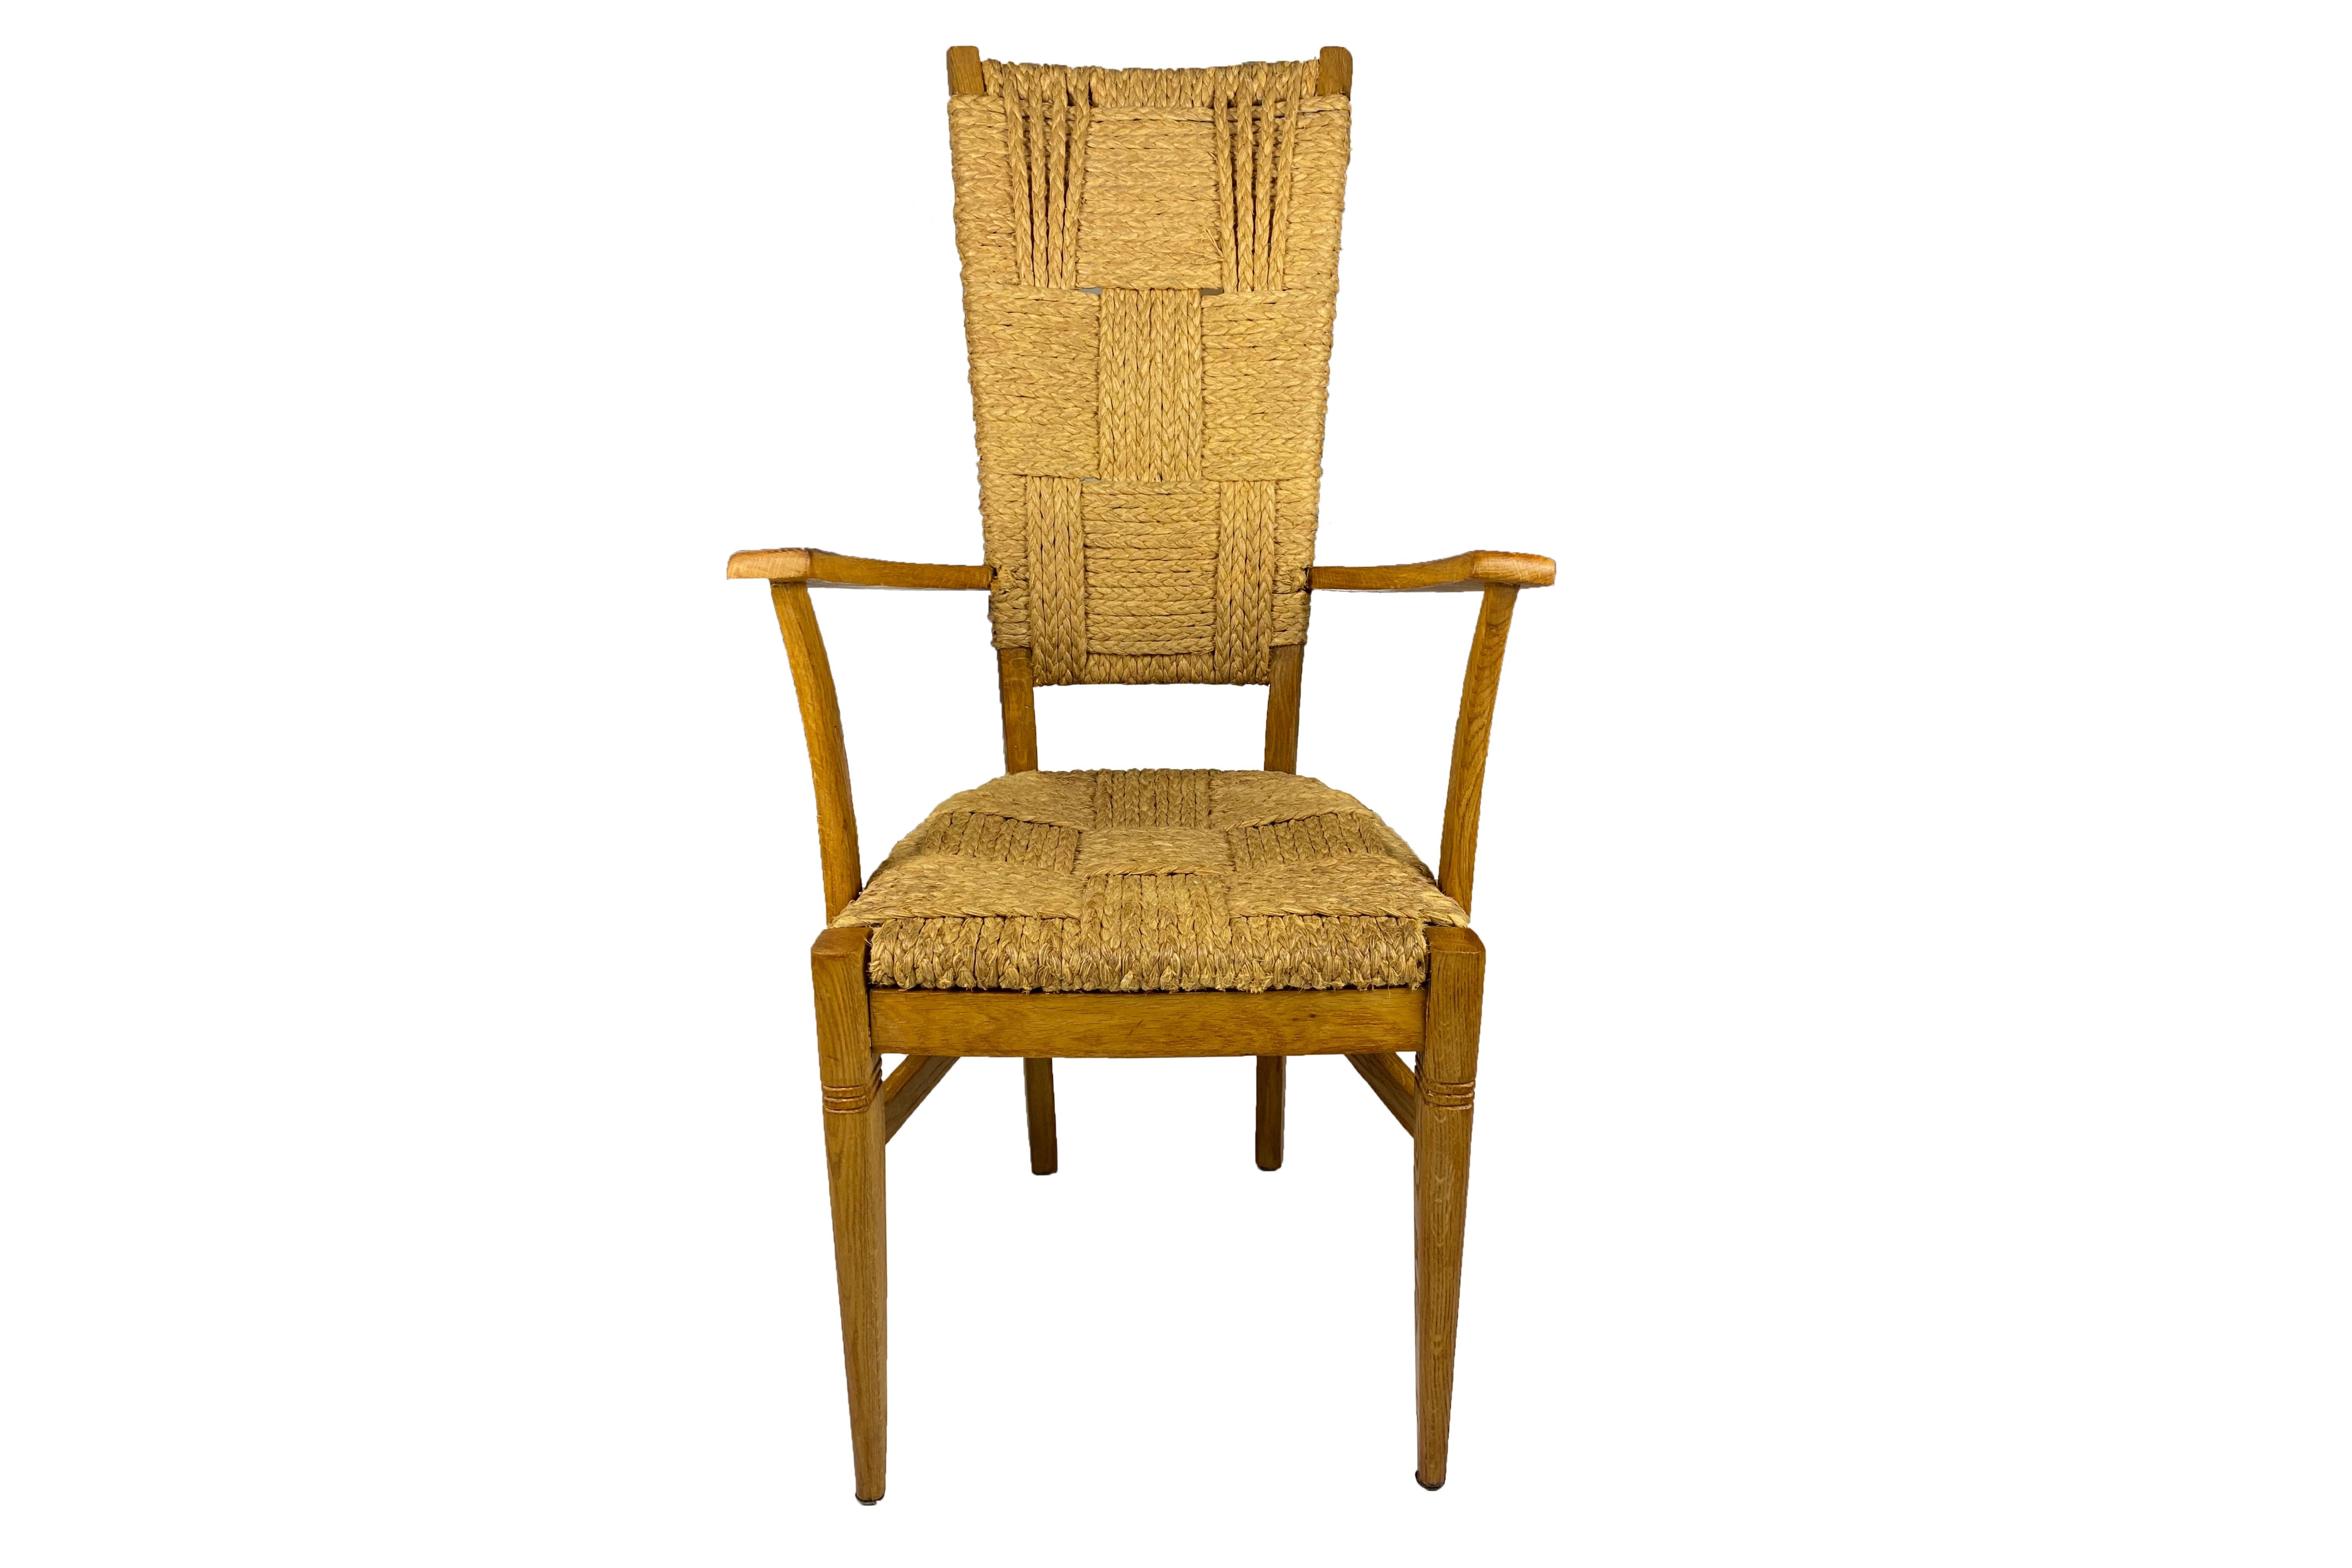 Set of four Audoux et Minet Armchairs.
Made with bentwood and rope.
Very unique set
Each with signed designer & manufacturer's plate,
Circa 1950, France.
Very good vintage condition.
Adrien Audoux and Frida Minet were a French couple and